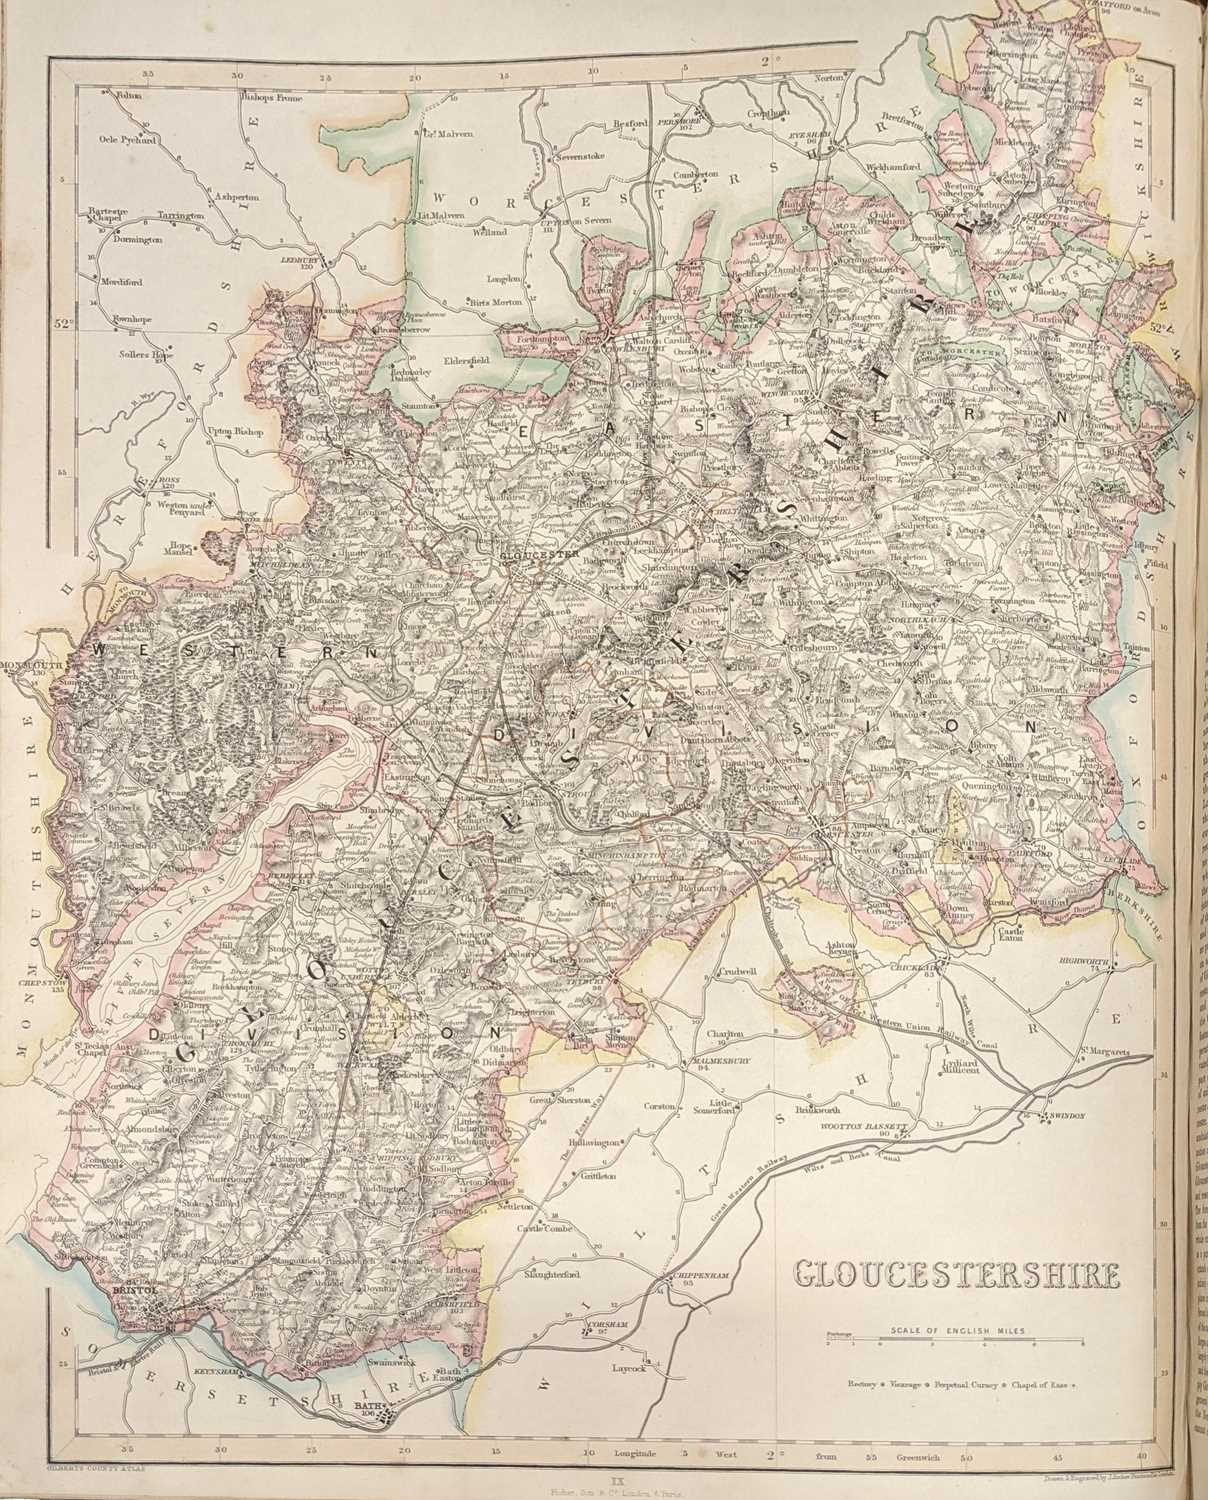 Lot 40 - Fisher, Son & Co. Fisher's County Atlas of England and Wales, [1845]